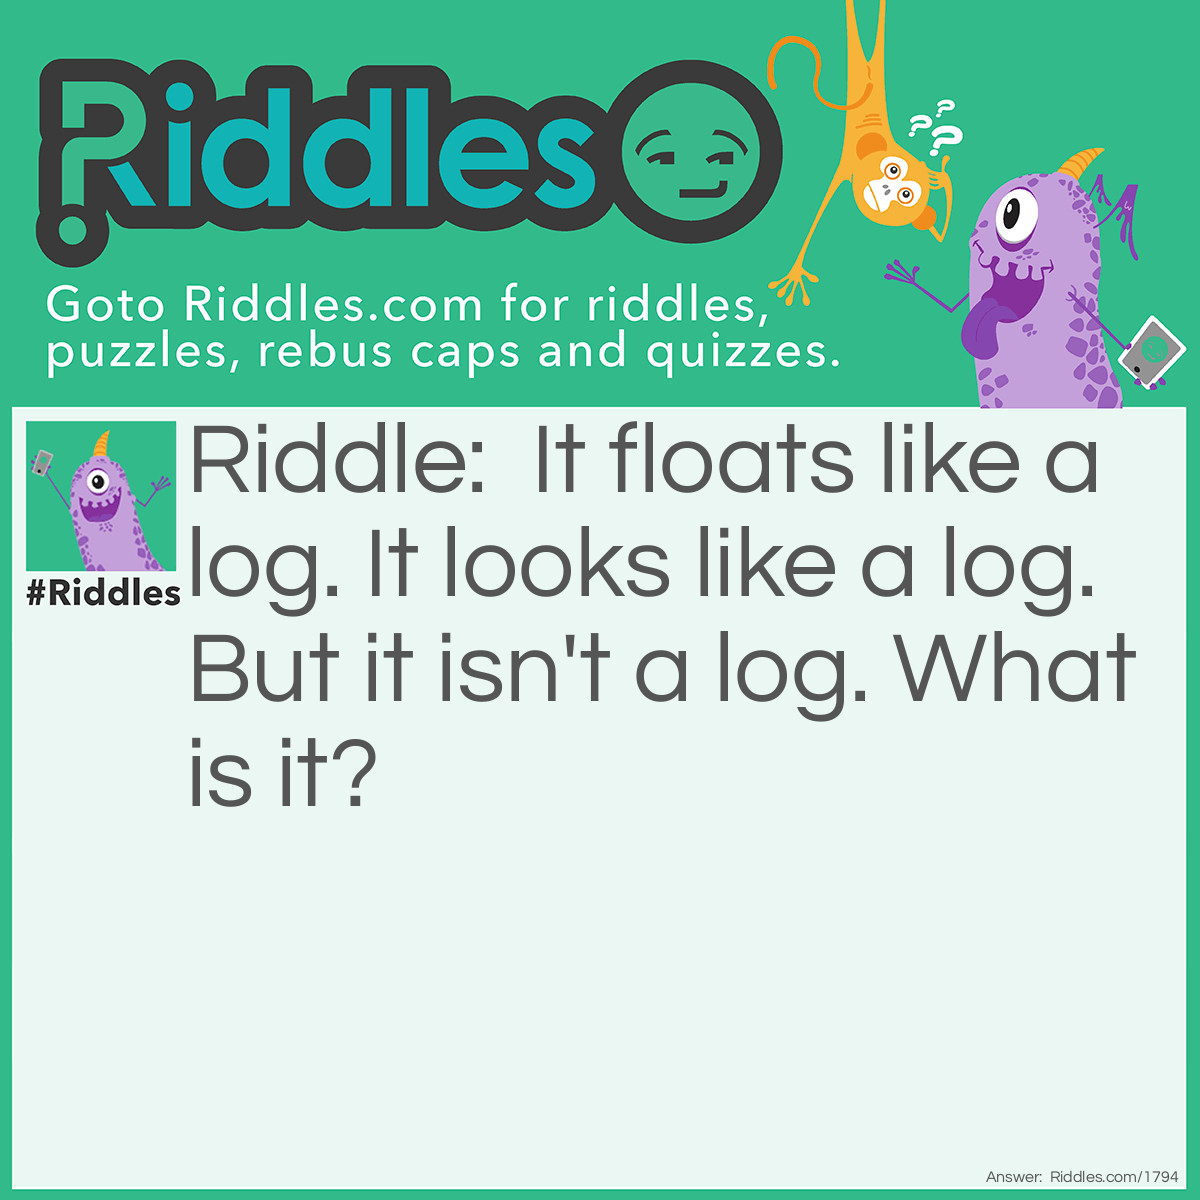 Riddle: It floats like a log. It looks like a log. But it isn't a log. What is it? Answer: An alligator.